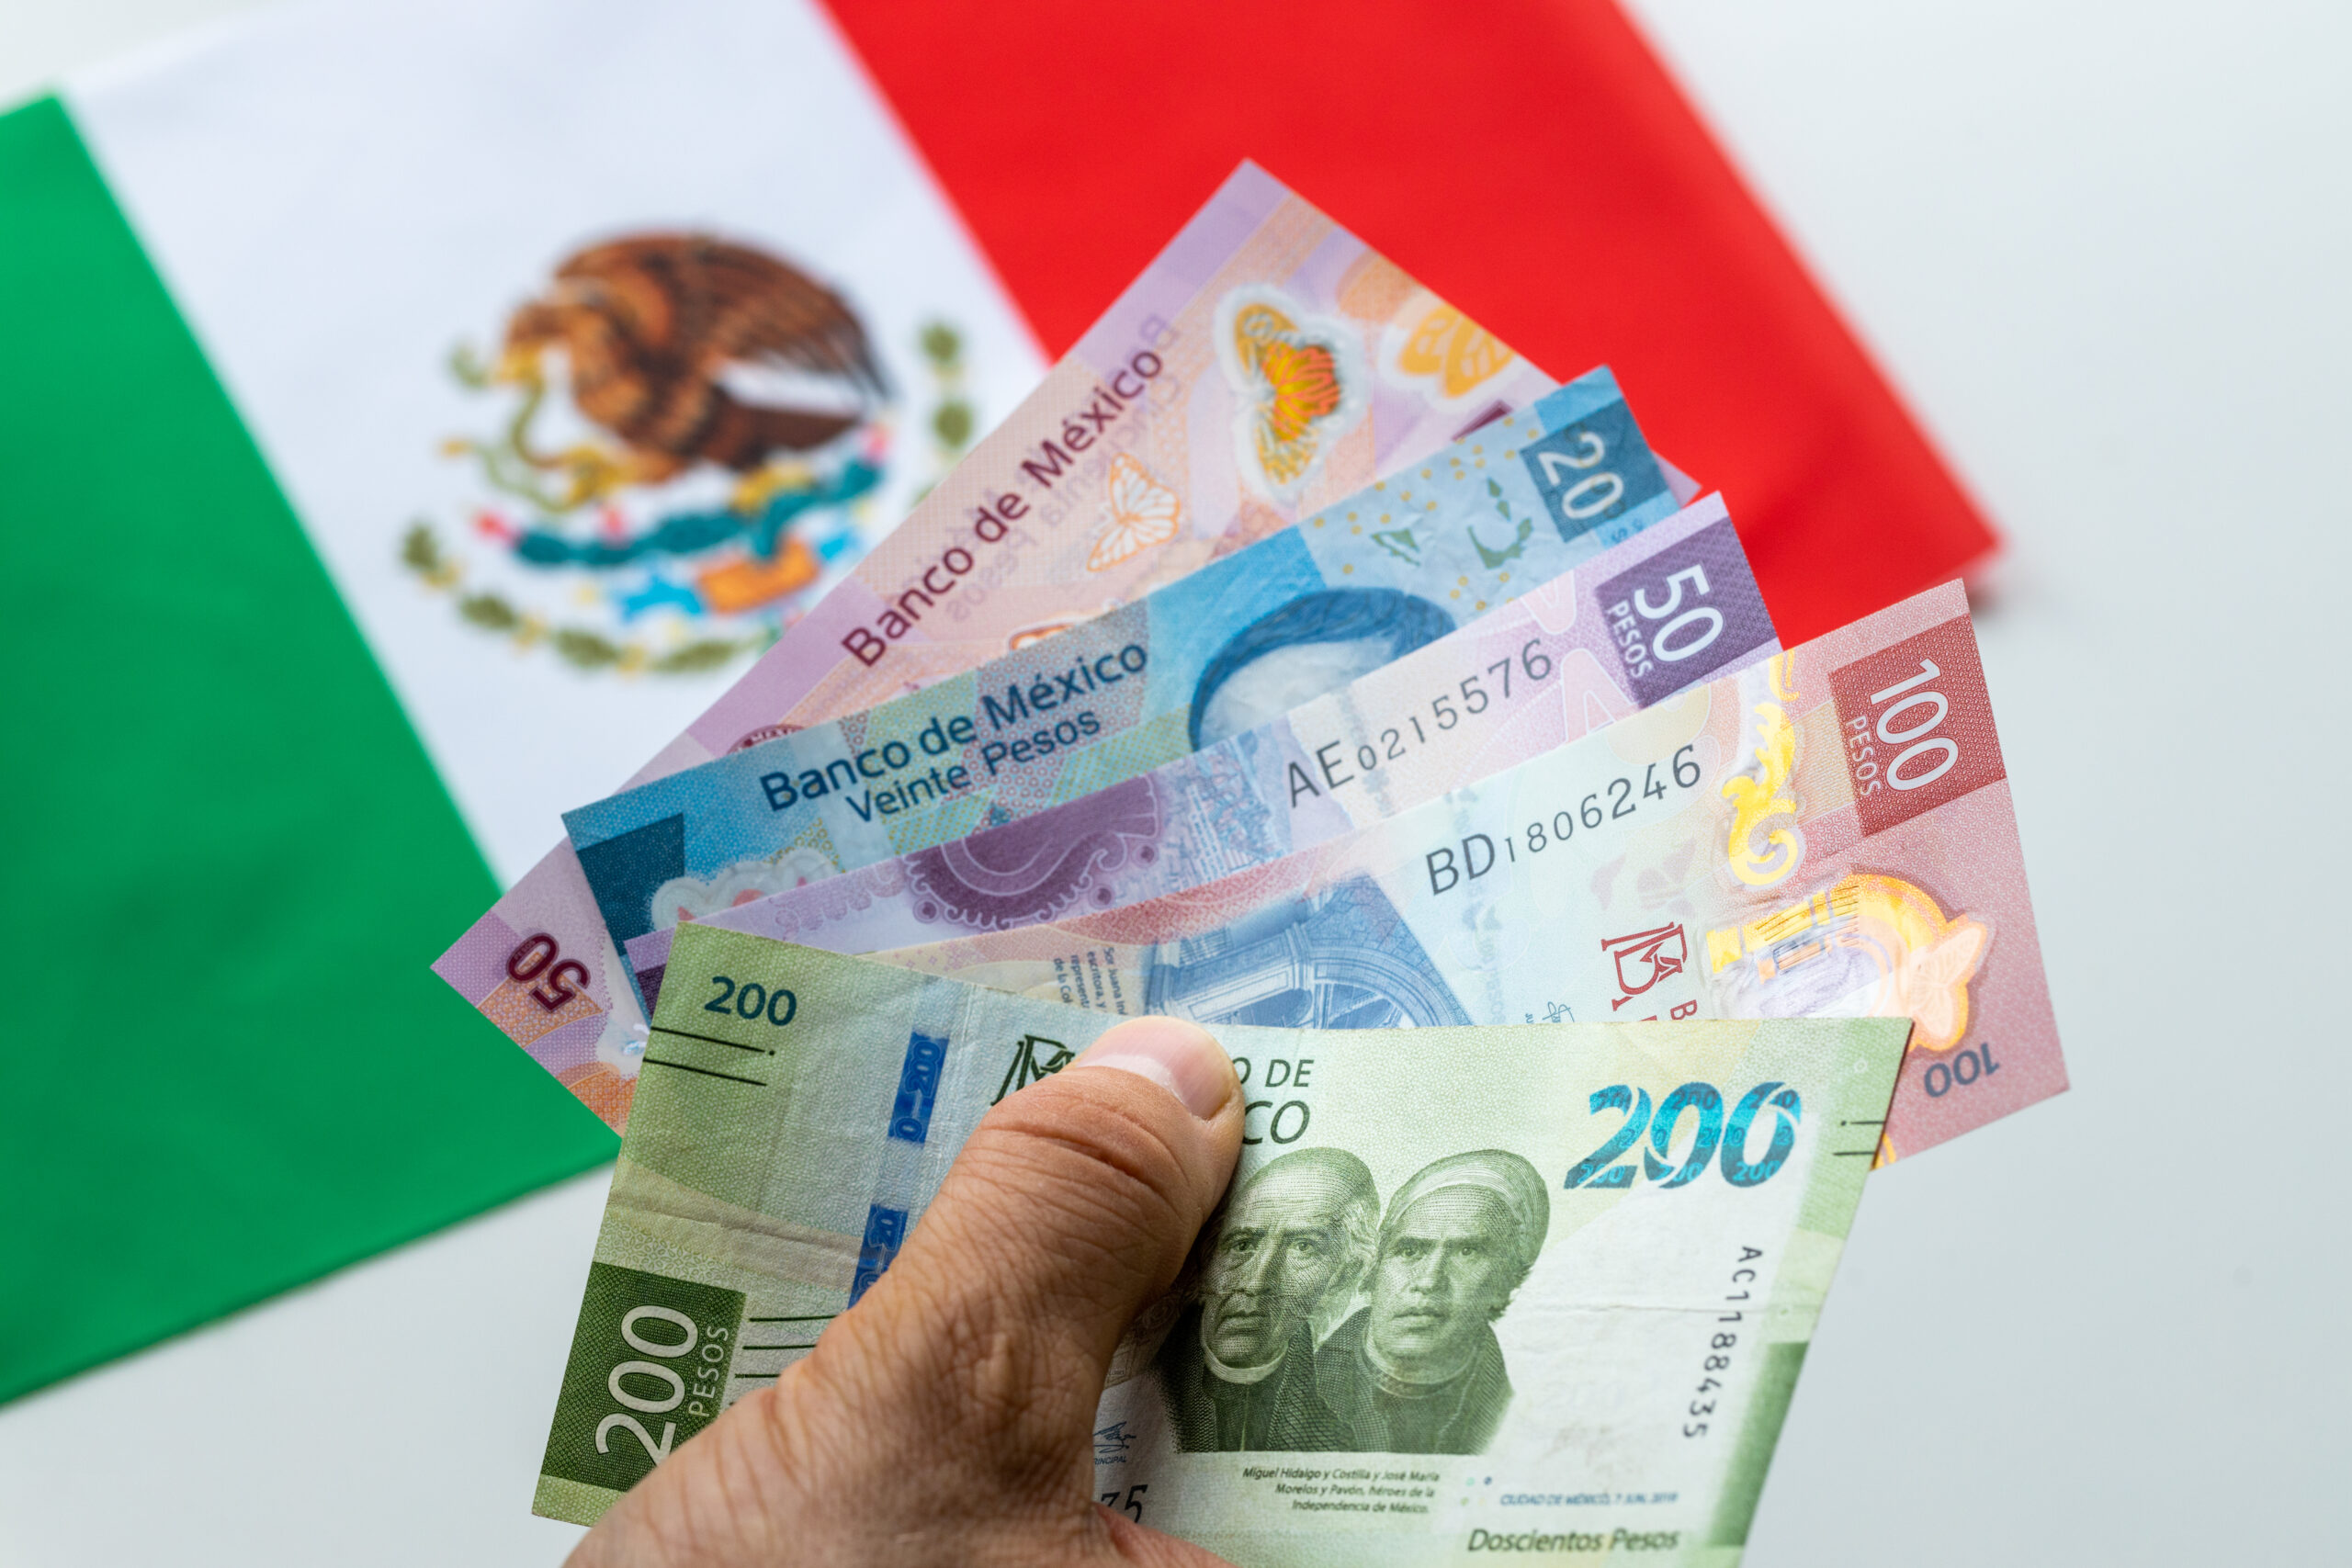 Mexican money held in the hand against the background of the Mexican flag